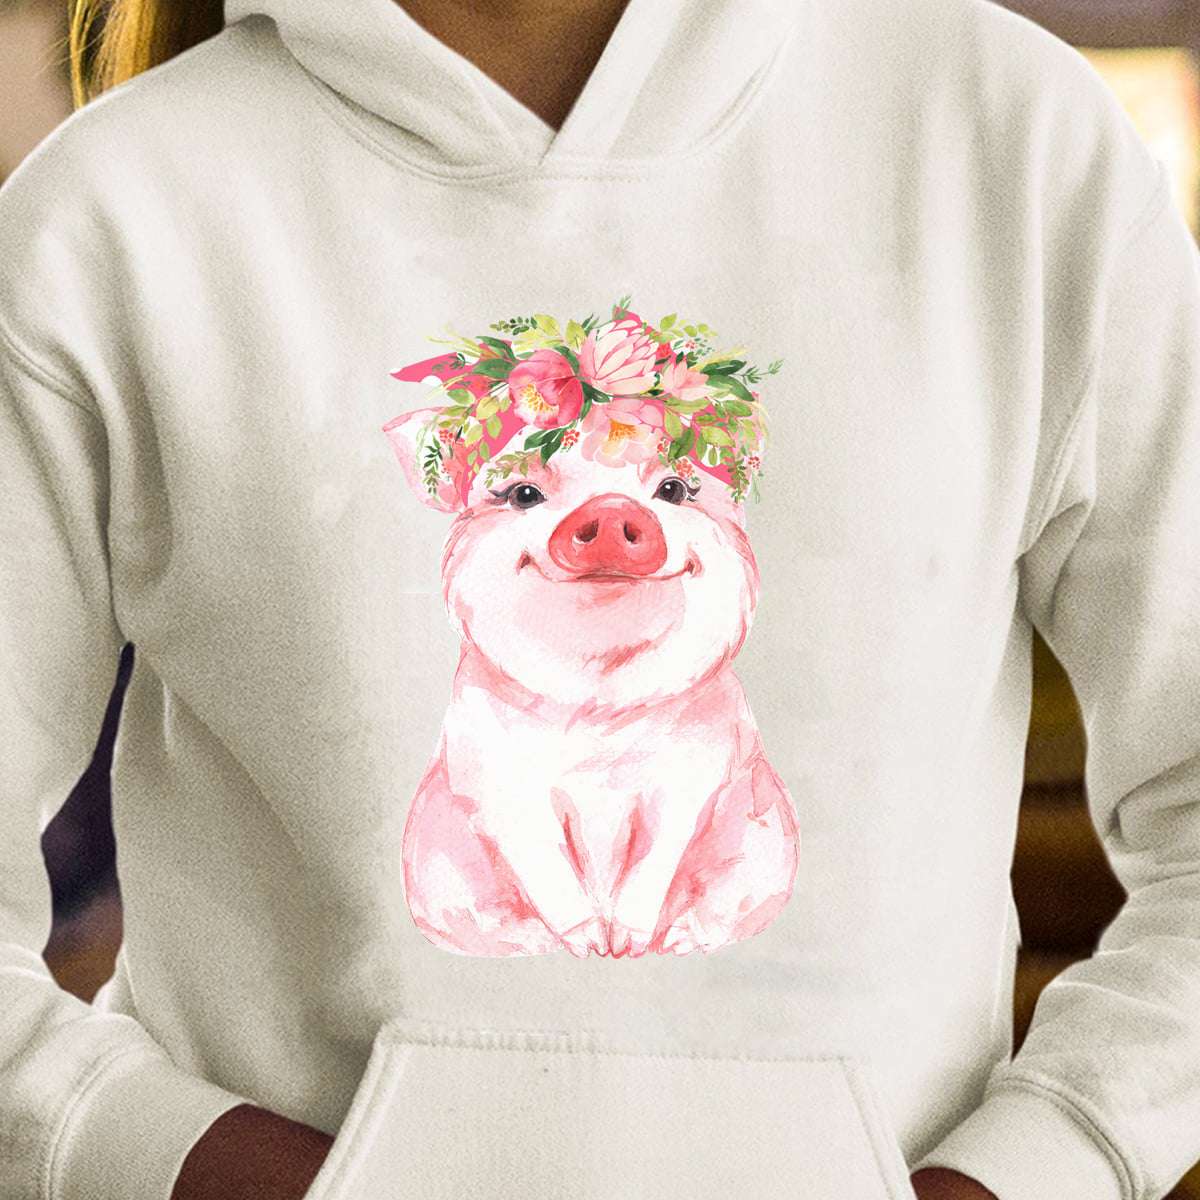 The Pig Tees Gifts - Pig with garland